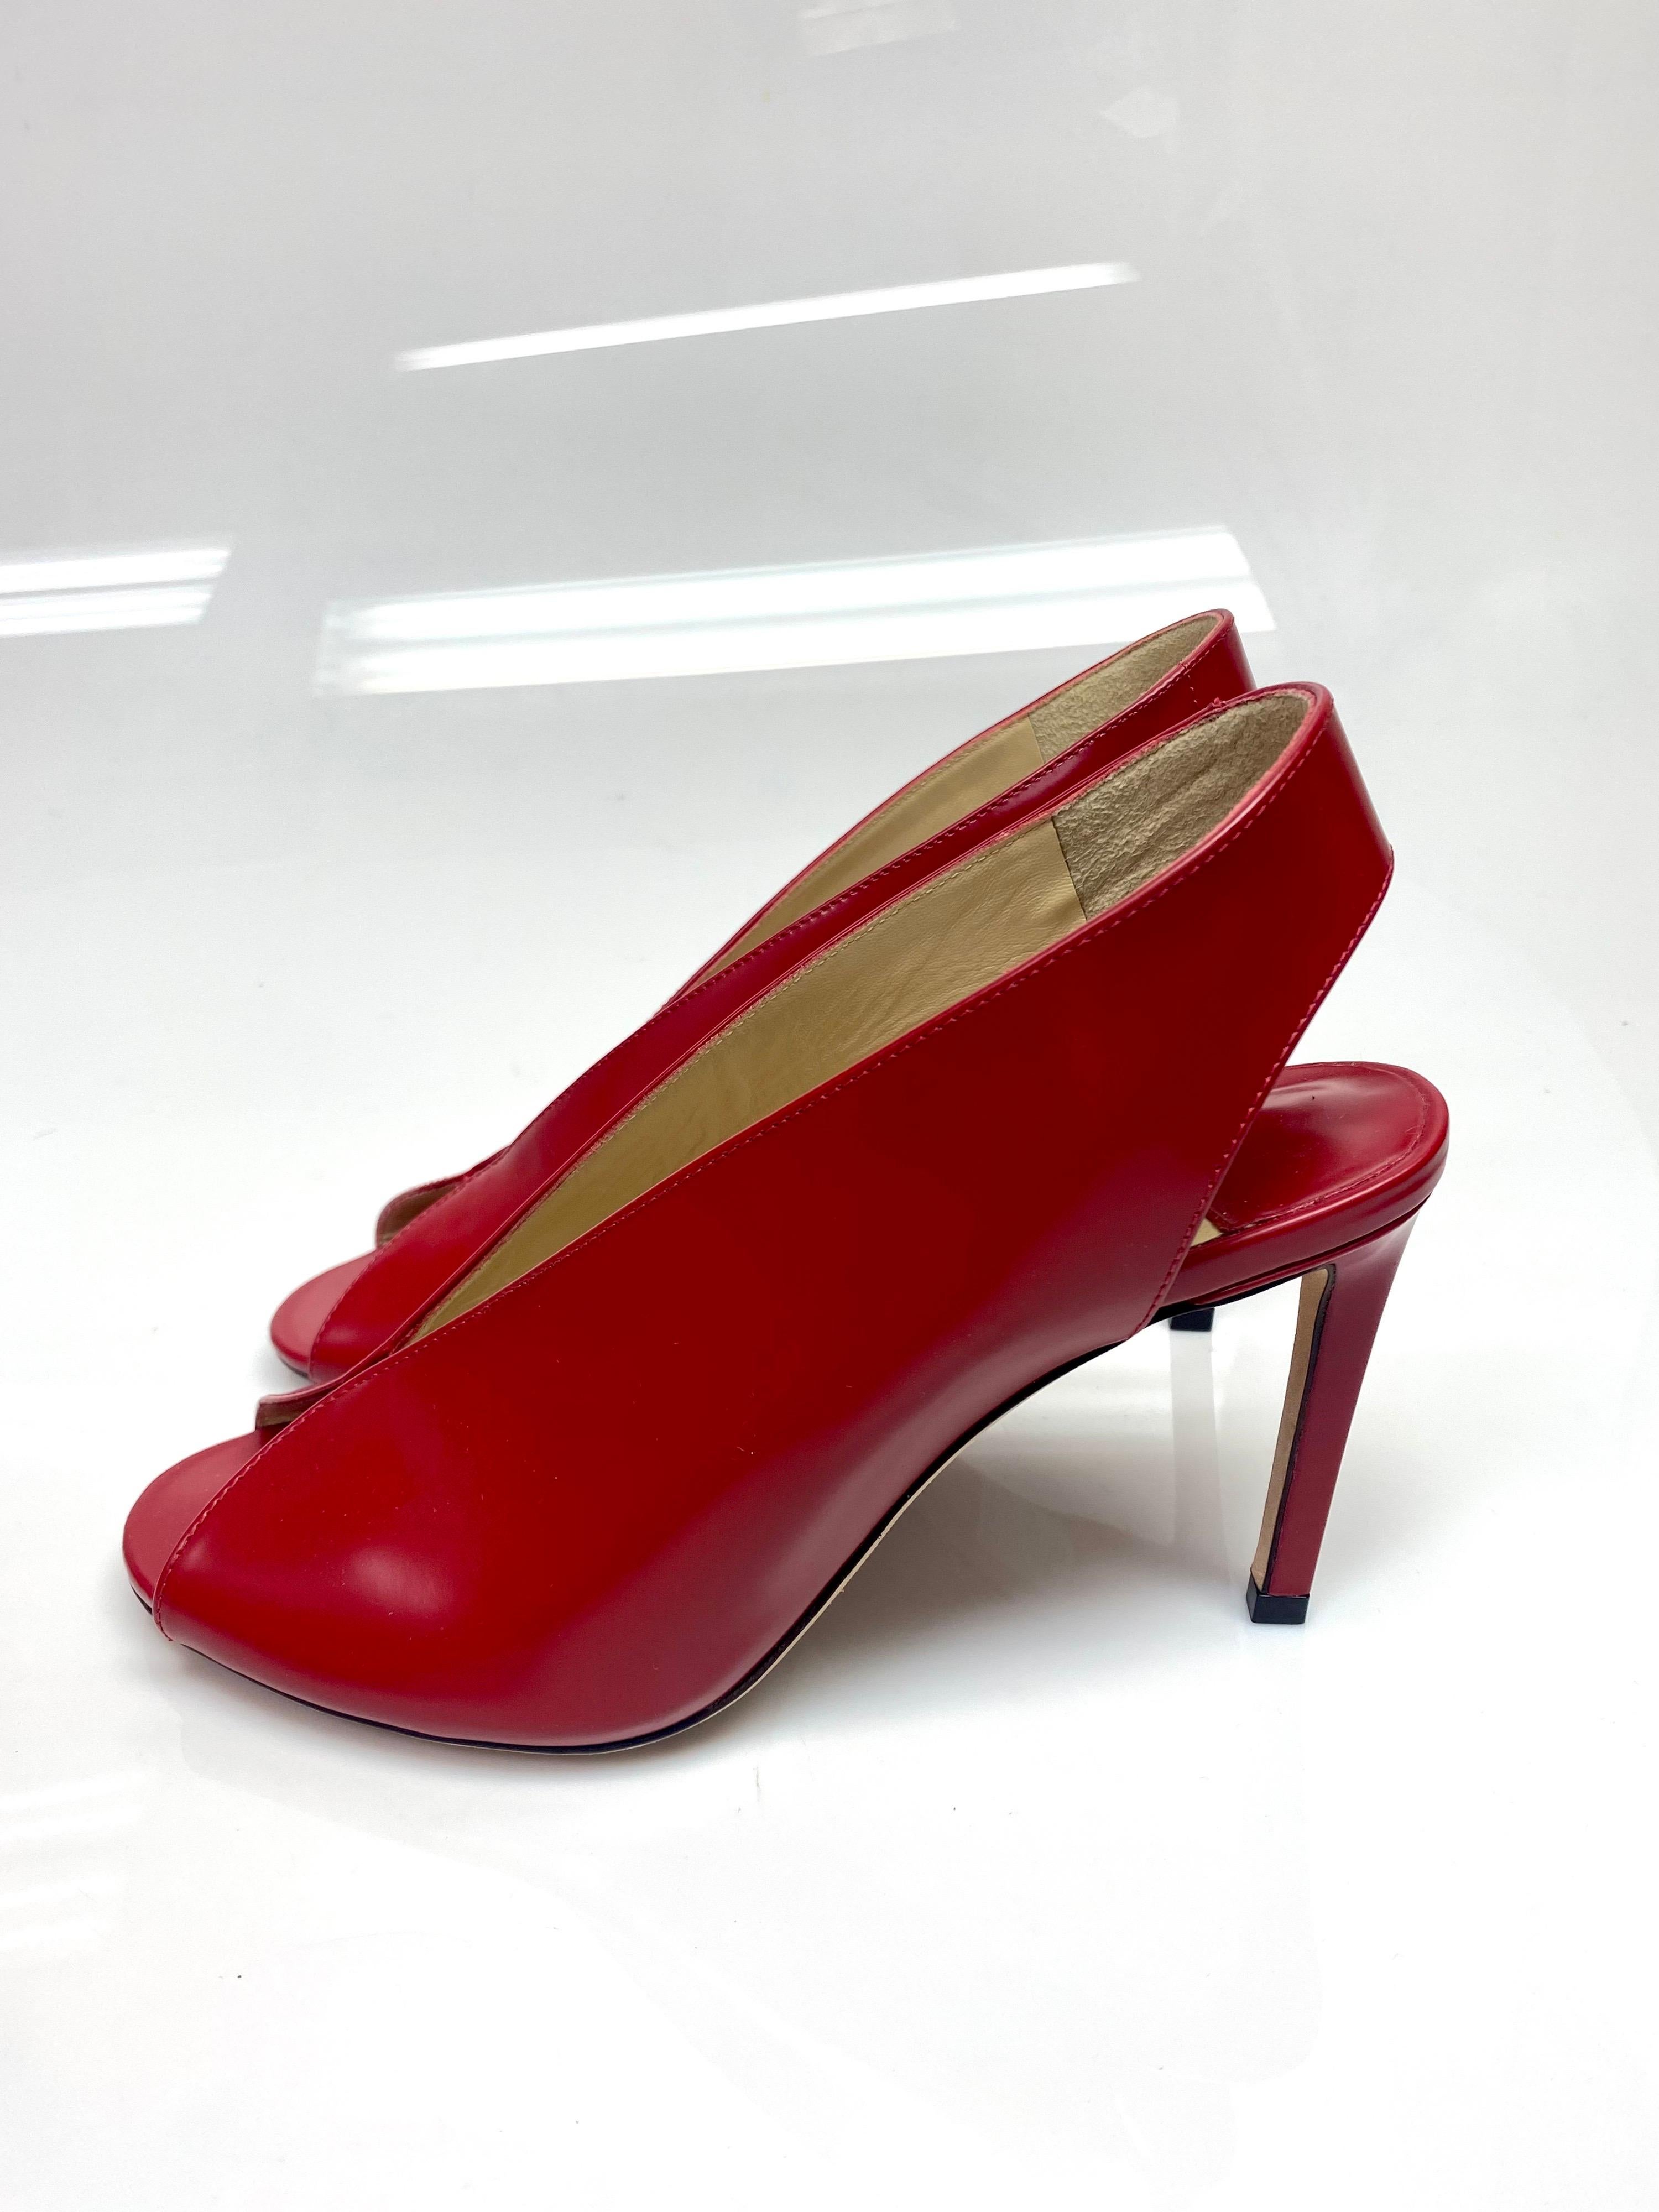 Jimmy Choo Red Leather Singback Heels - Size 37  In Excellent Condition For Sale In West Palm Beach, FL